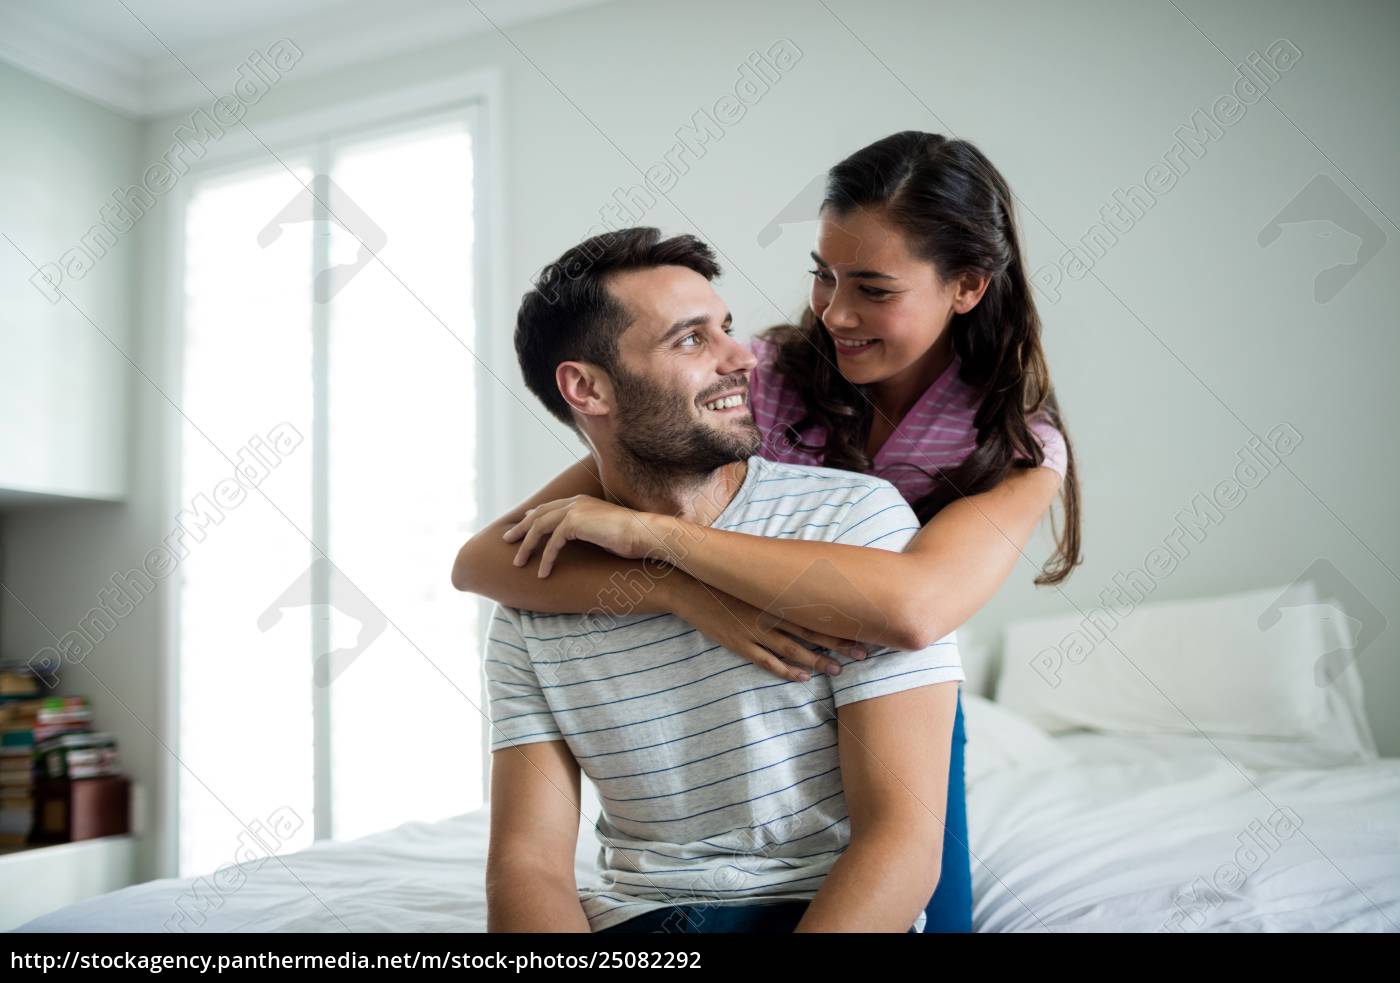 Royalty Free Photo 25082292 Couple Embracing Each Other In Bedroom